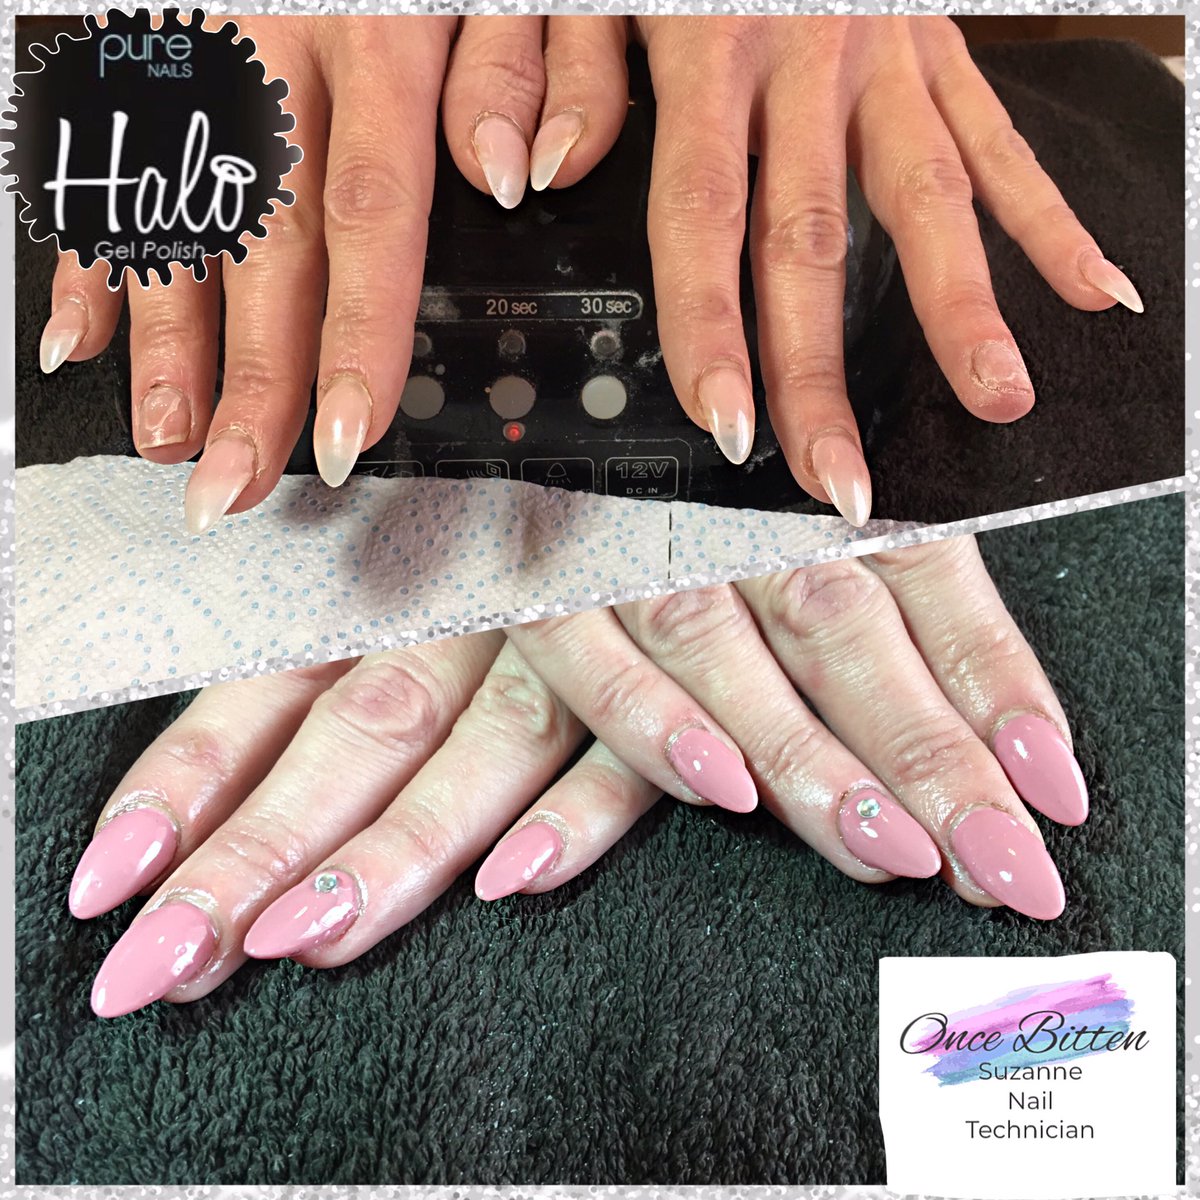 Leanne (my hairdresser @ The Kutting Room, Reddish) came for me to replace 2 nails (not my work) and give them a quick gel polish using ‘Dusky Pink’ 
#GelPolish #PureNails
#Halo #DuskyPink 
#CJPAcrylicSystems #NailArt
#Pampertime #Homebased 
#StockportNailTech #SK5Reddish